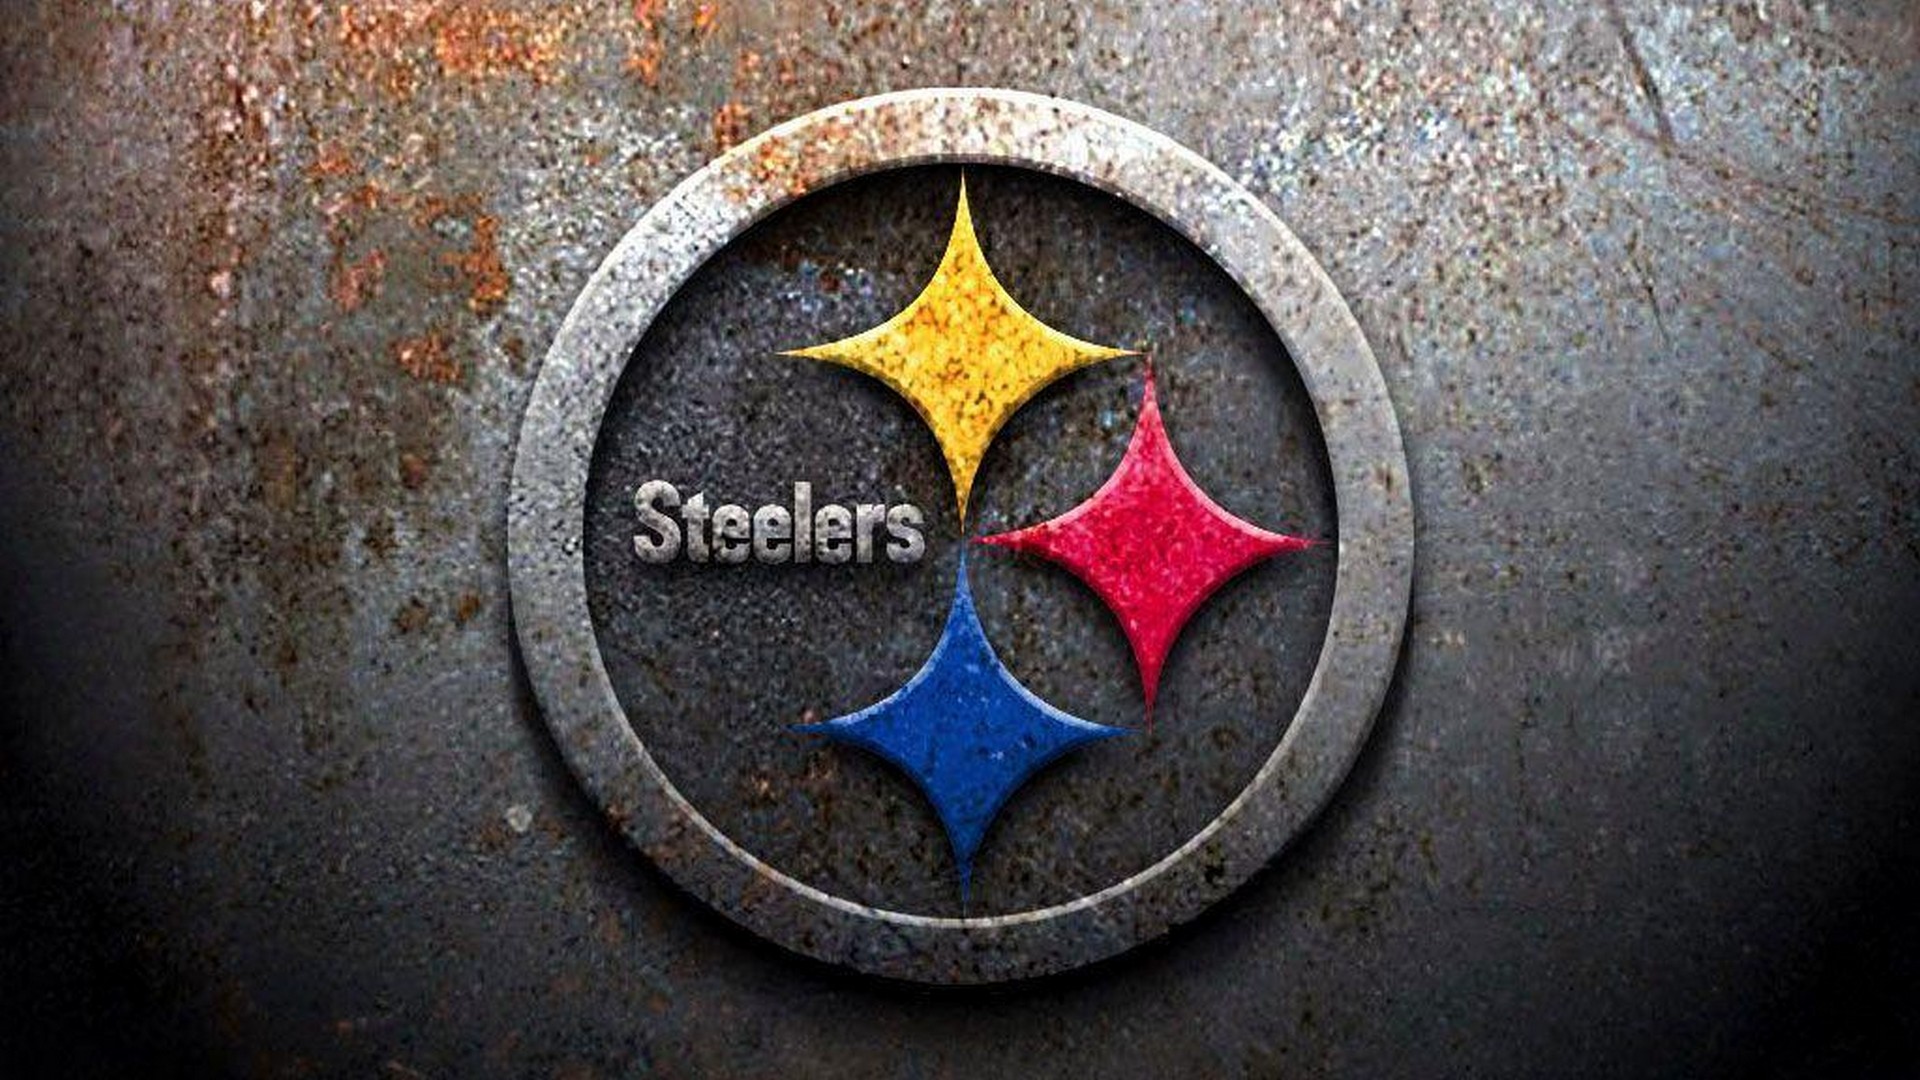 Wallpaper Desktop Steelers Logo HD With Resolution 1920X1080 pixel. You can make this wallpaper for your Mac or Windows Desktop Background, iPhone, Android or Tablet and another Smartphone device for free